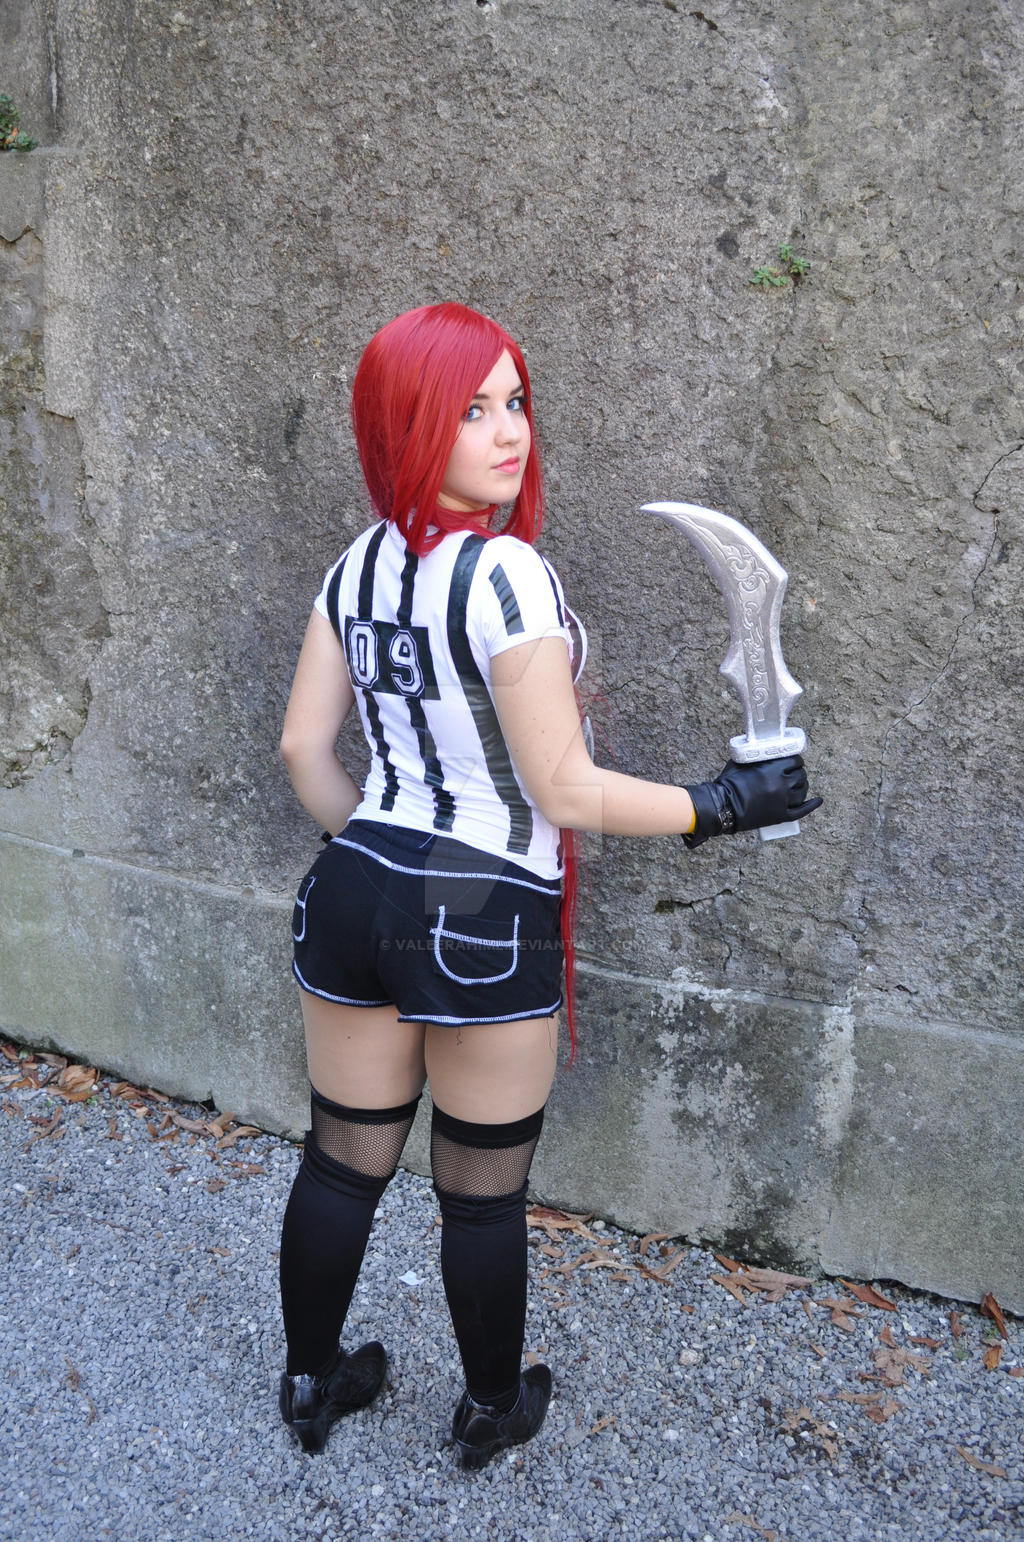 Katarina red card cosplay from league of legends